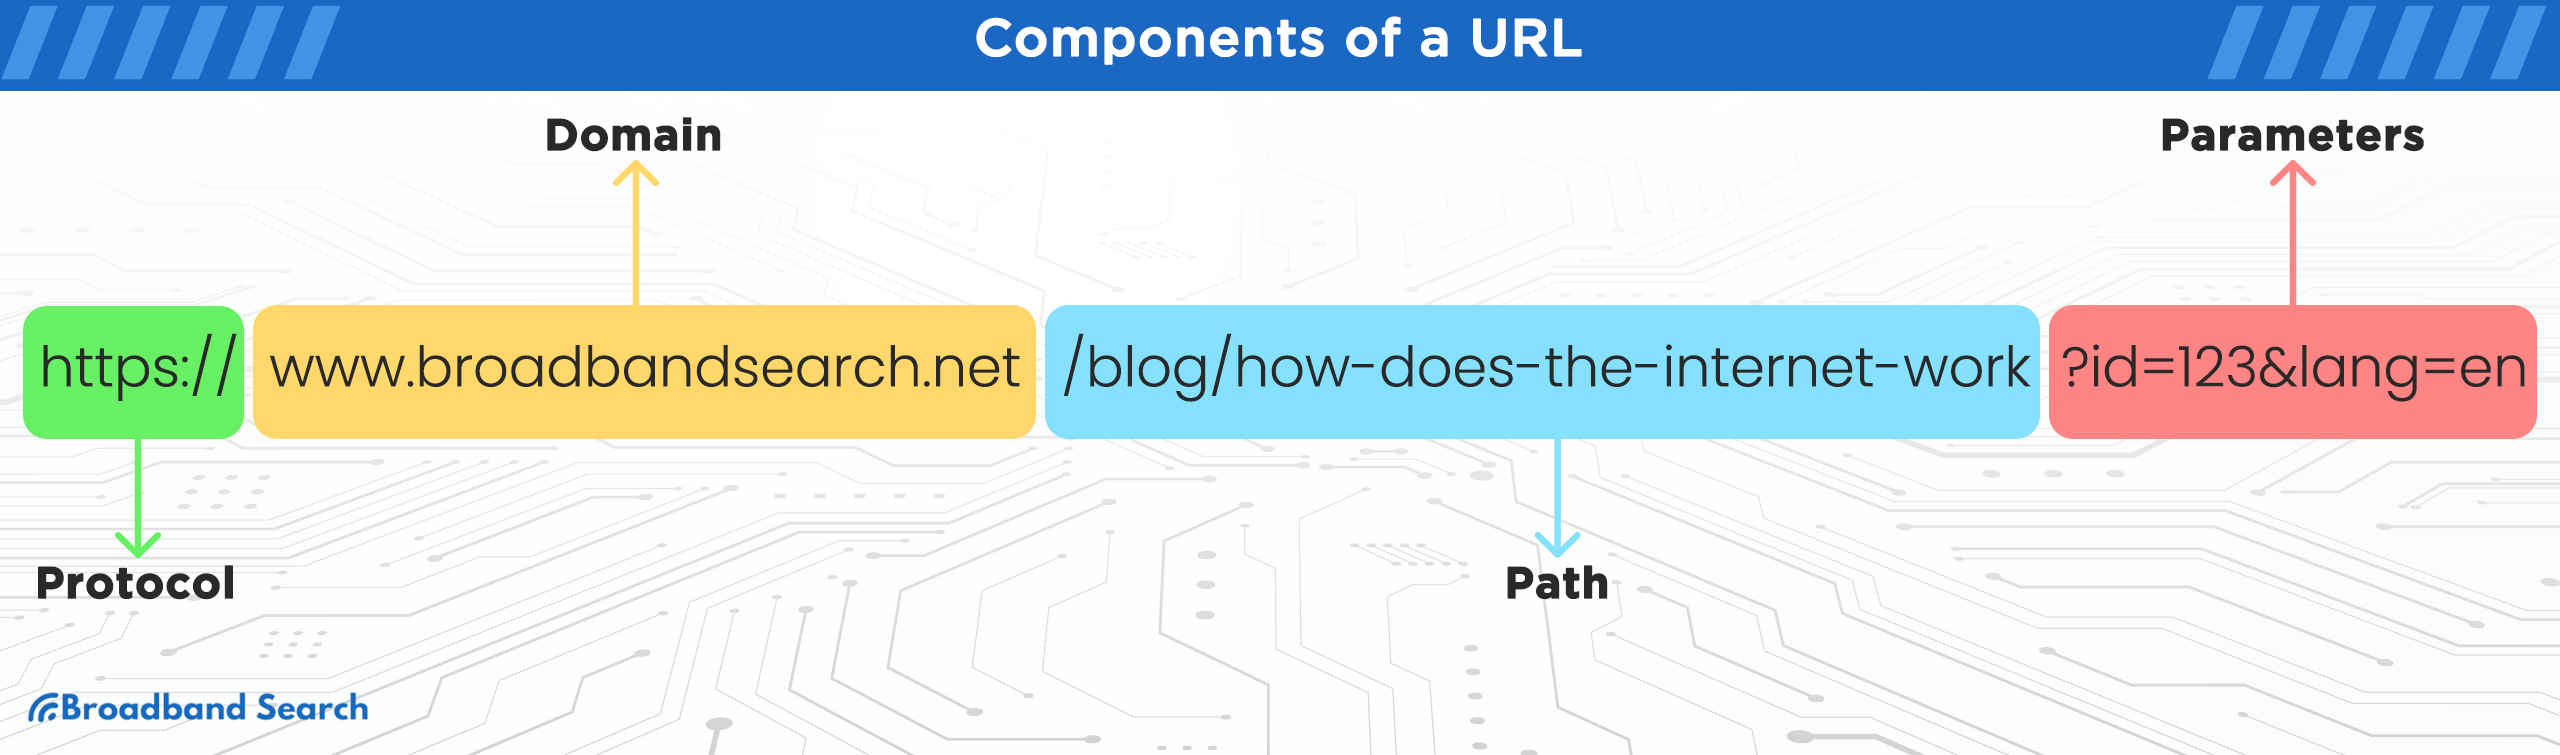 components of a URL